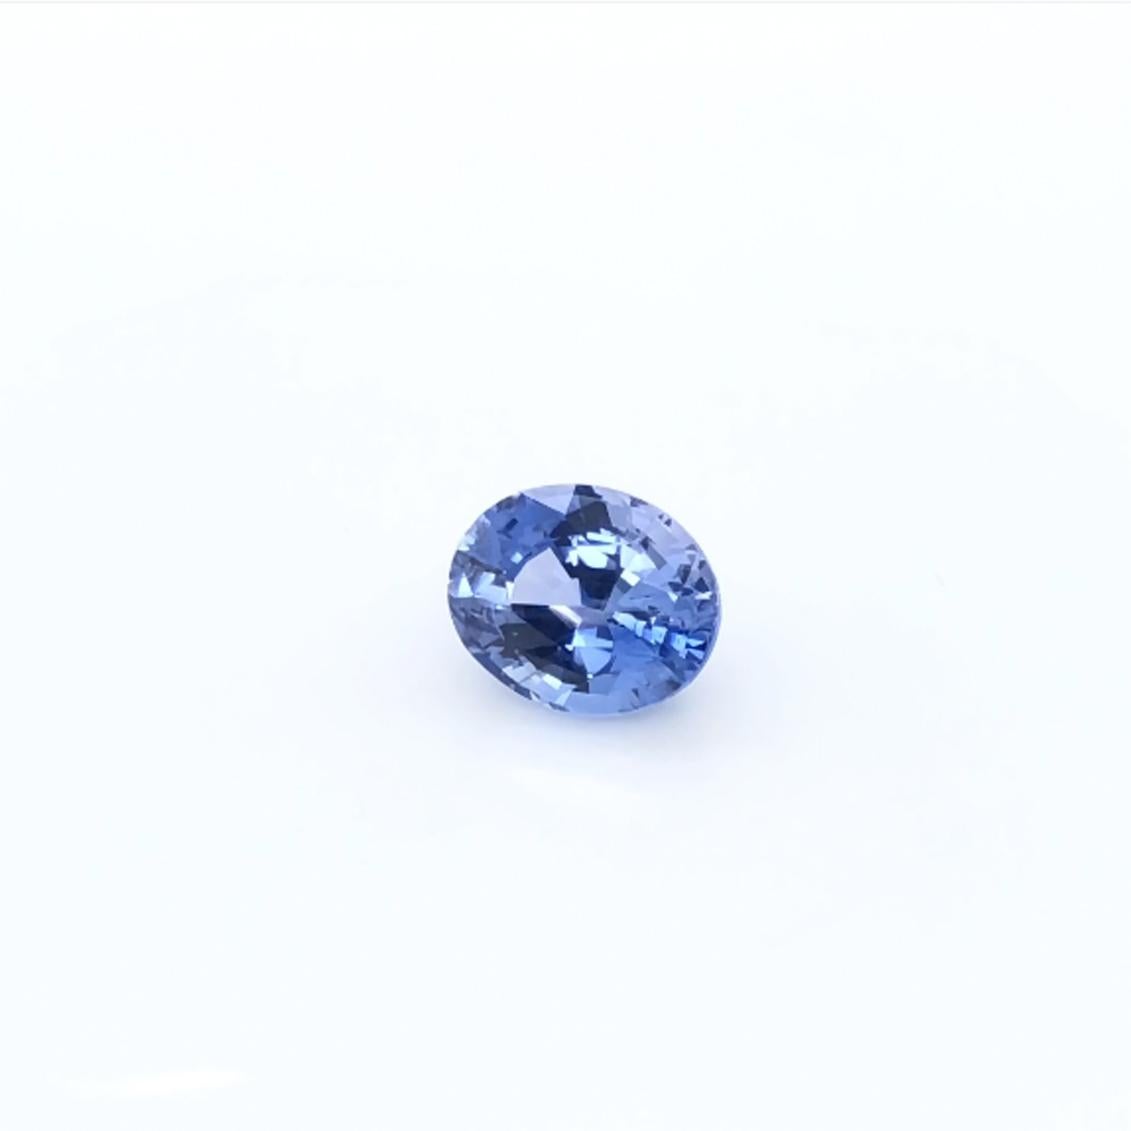 Carat: 4.23 
Item: Blue Sapphire 
Type: Natural 
Shape: Oval 
Origin: Sri Lanka 
Color: Blue
Size: 10.32X8.28X6.07
Certificate: BELL-R-202033153, GIA2019-2314959729/6

Embark on a journey of unparalleled elegance with our certified Blue Sapphire,